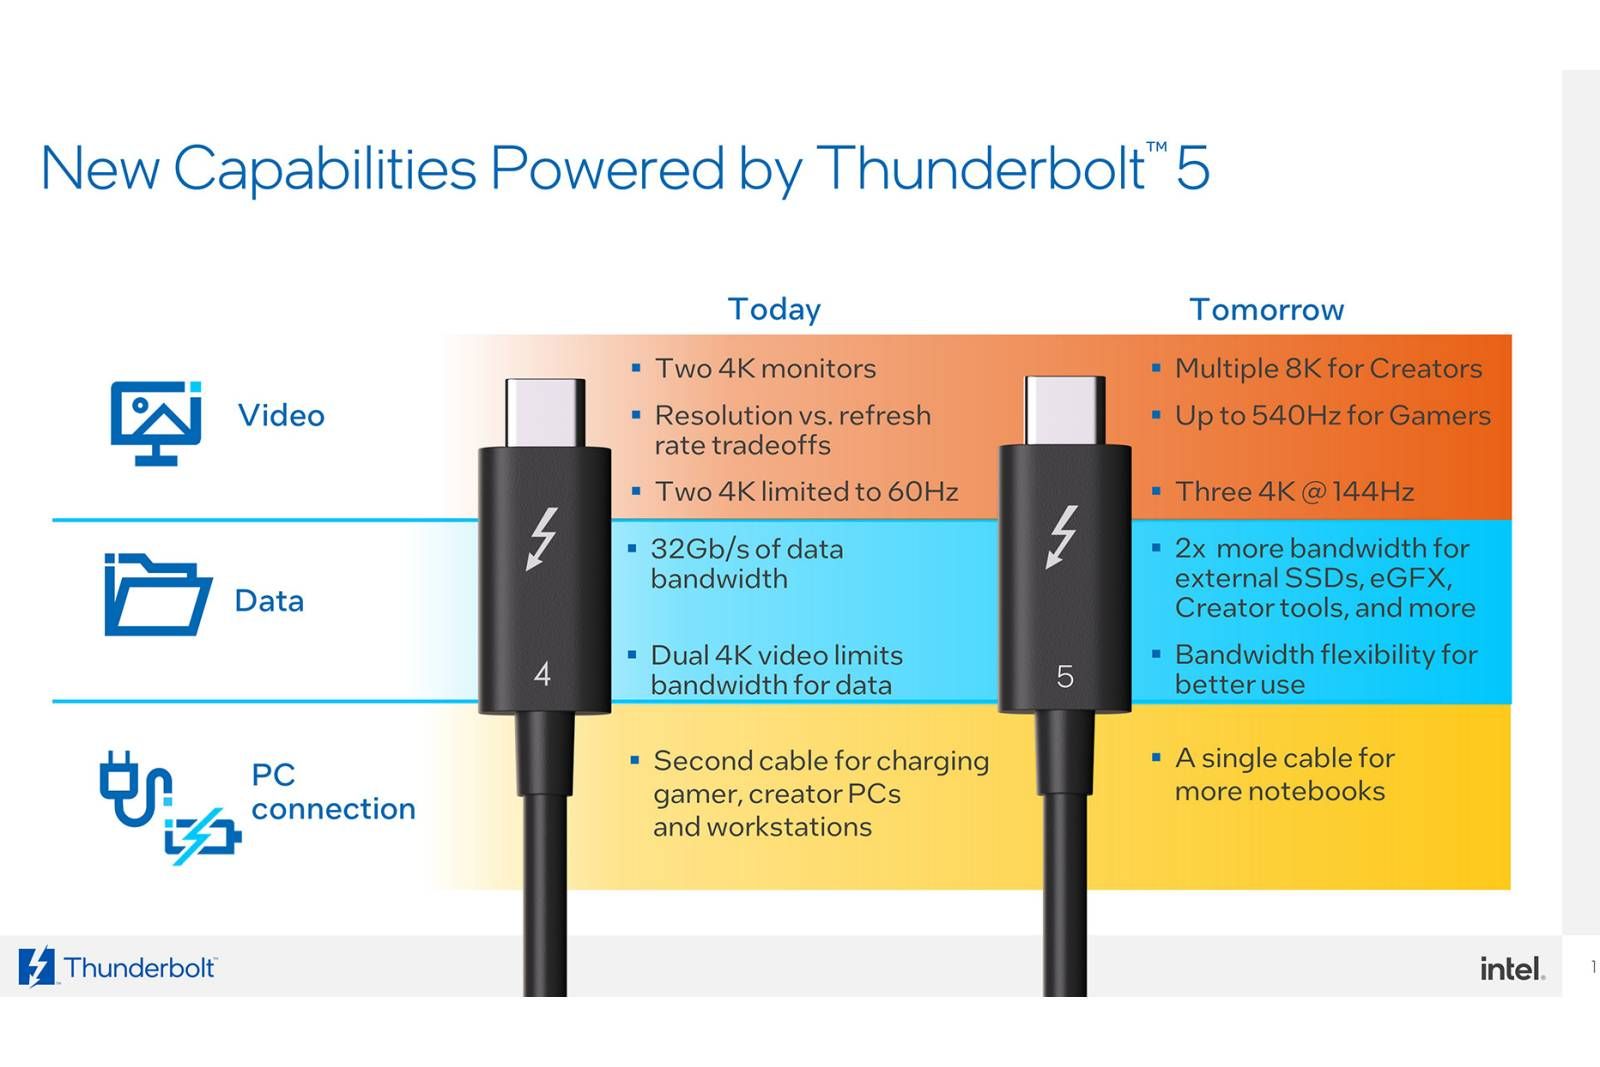 What is Thunderbolt 3? Working, Benefits and Uses - ElectronicsHub